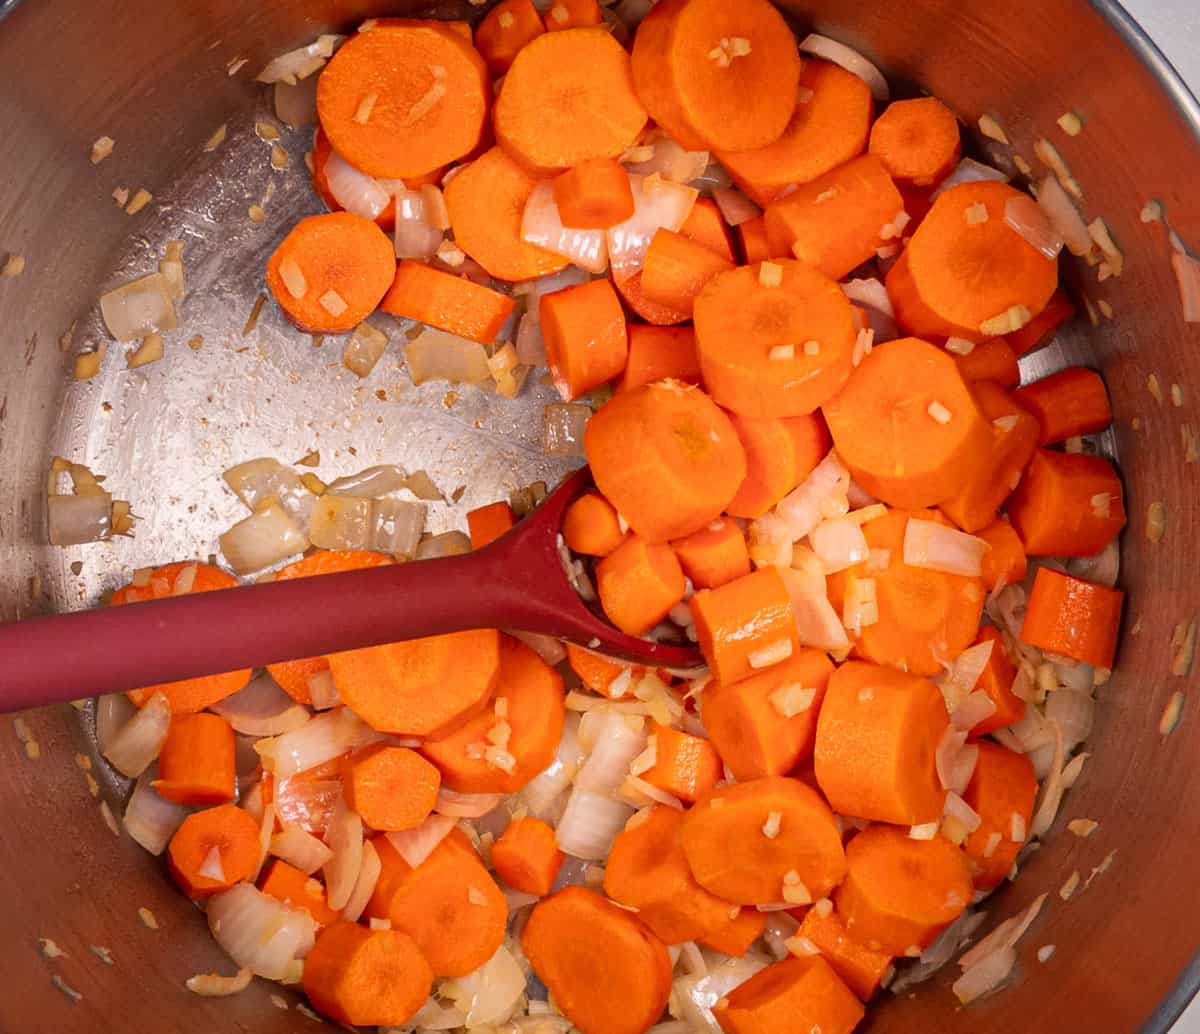 Onions and carrots sauteing in a pot.